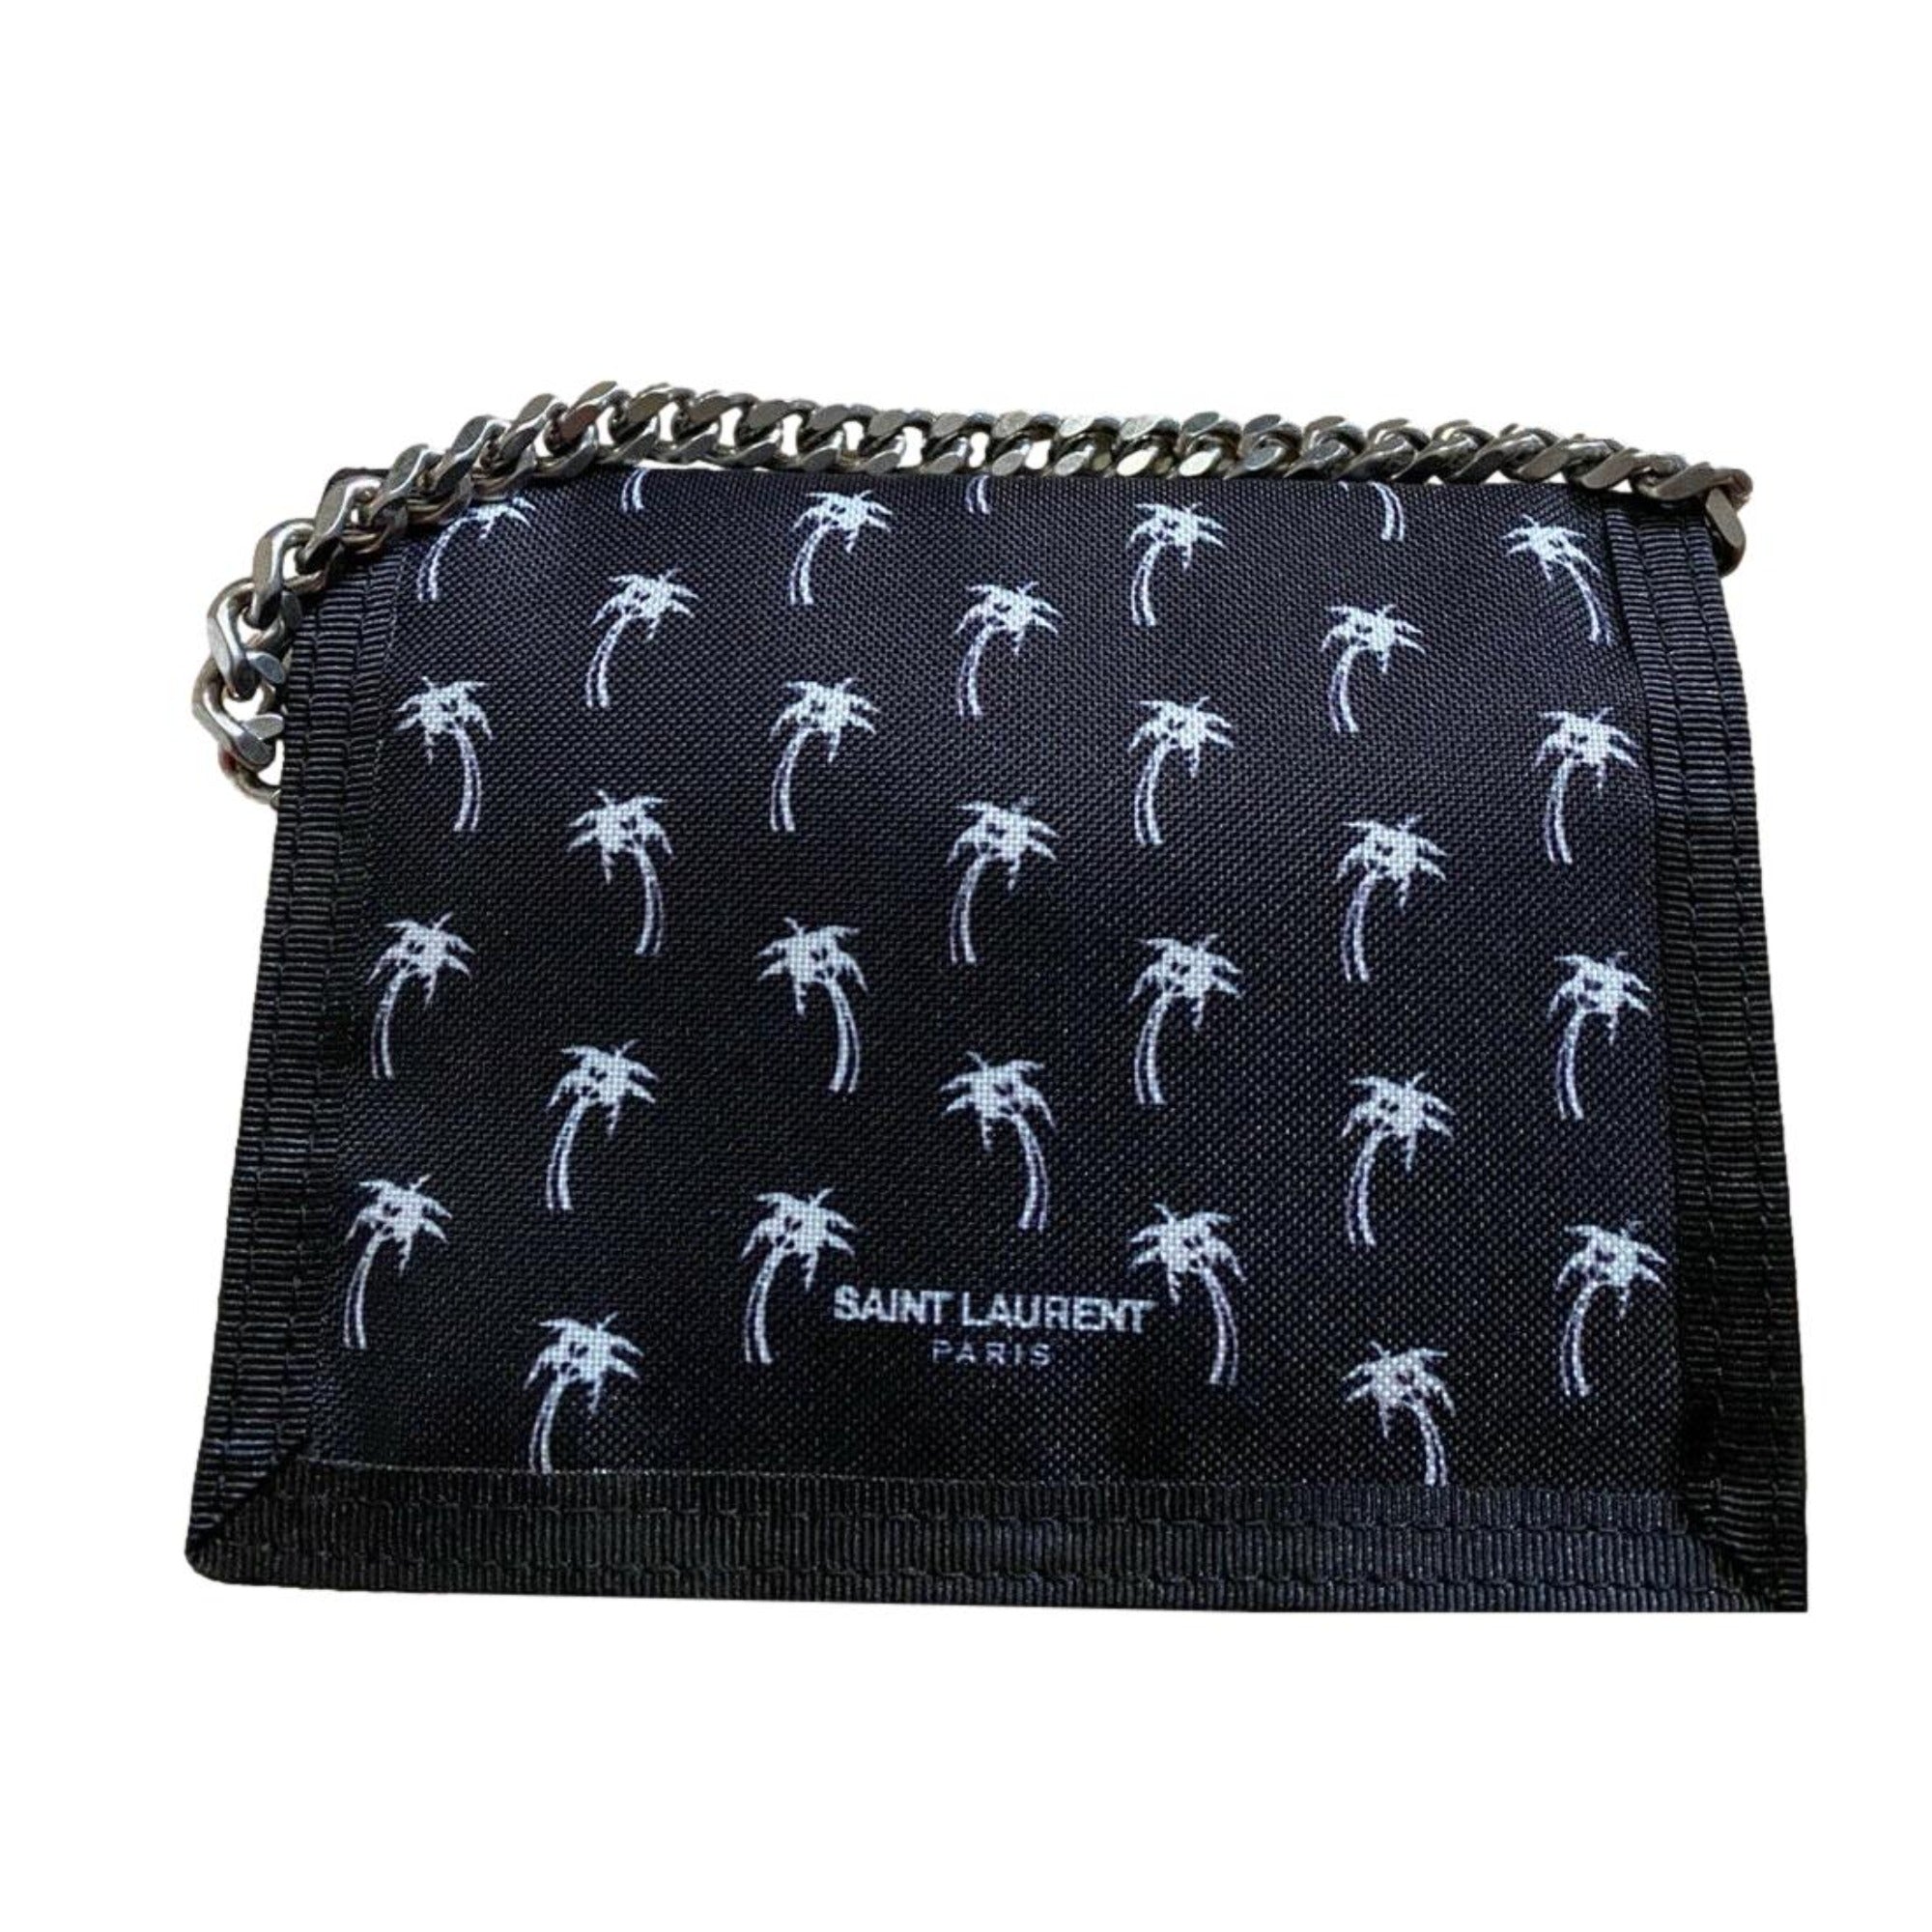 Saint Laurent Buffalo Palm Tree Black Nylon Chain Trifold Wallet 586279 at_Queen_Bee_of_Beverly_Hills